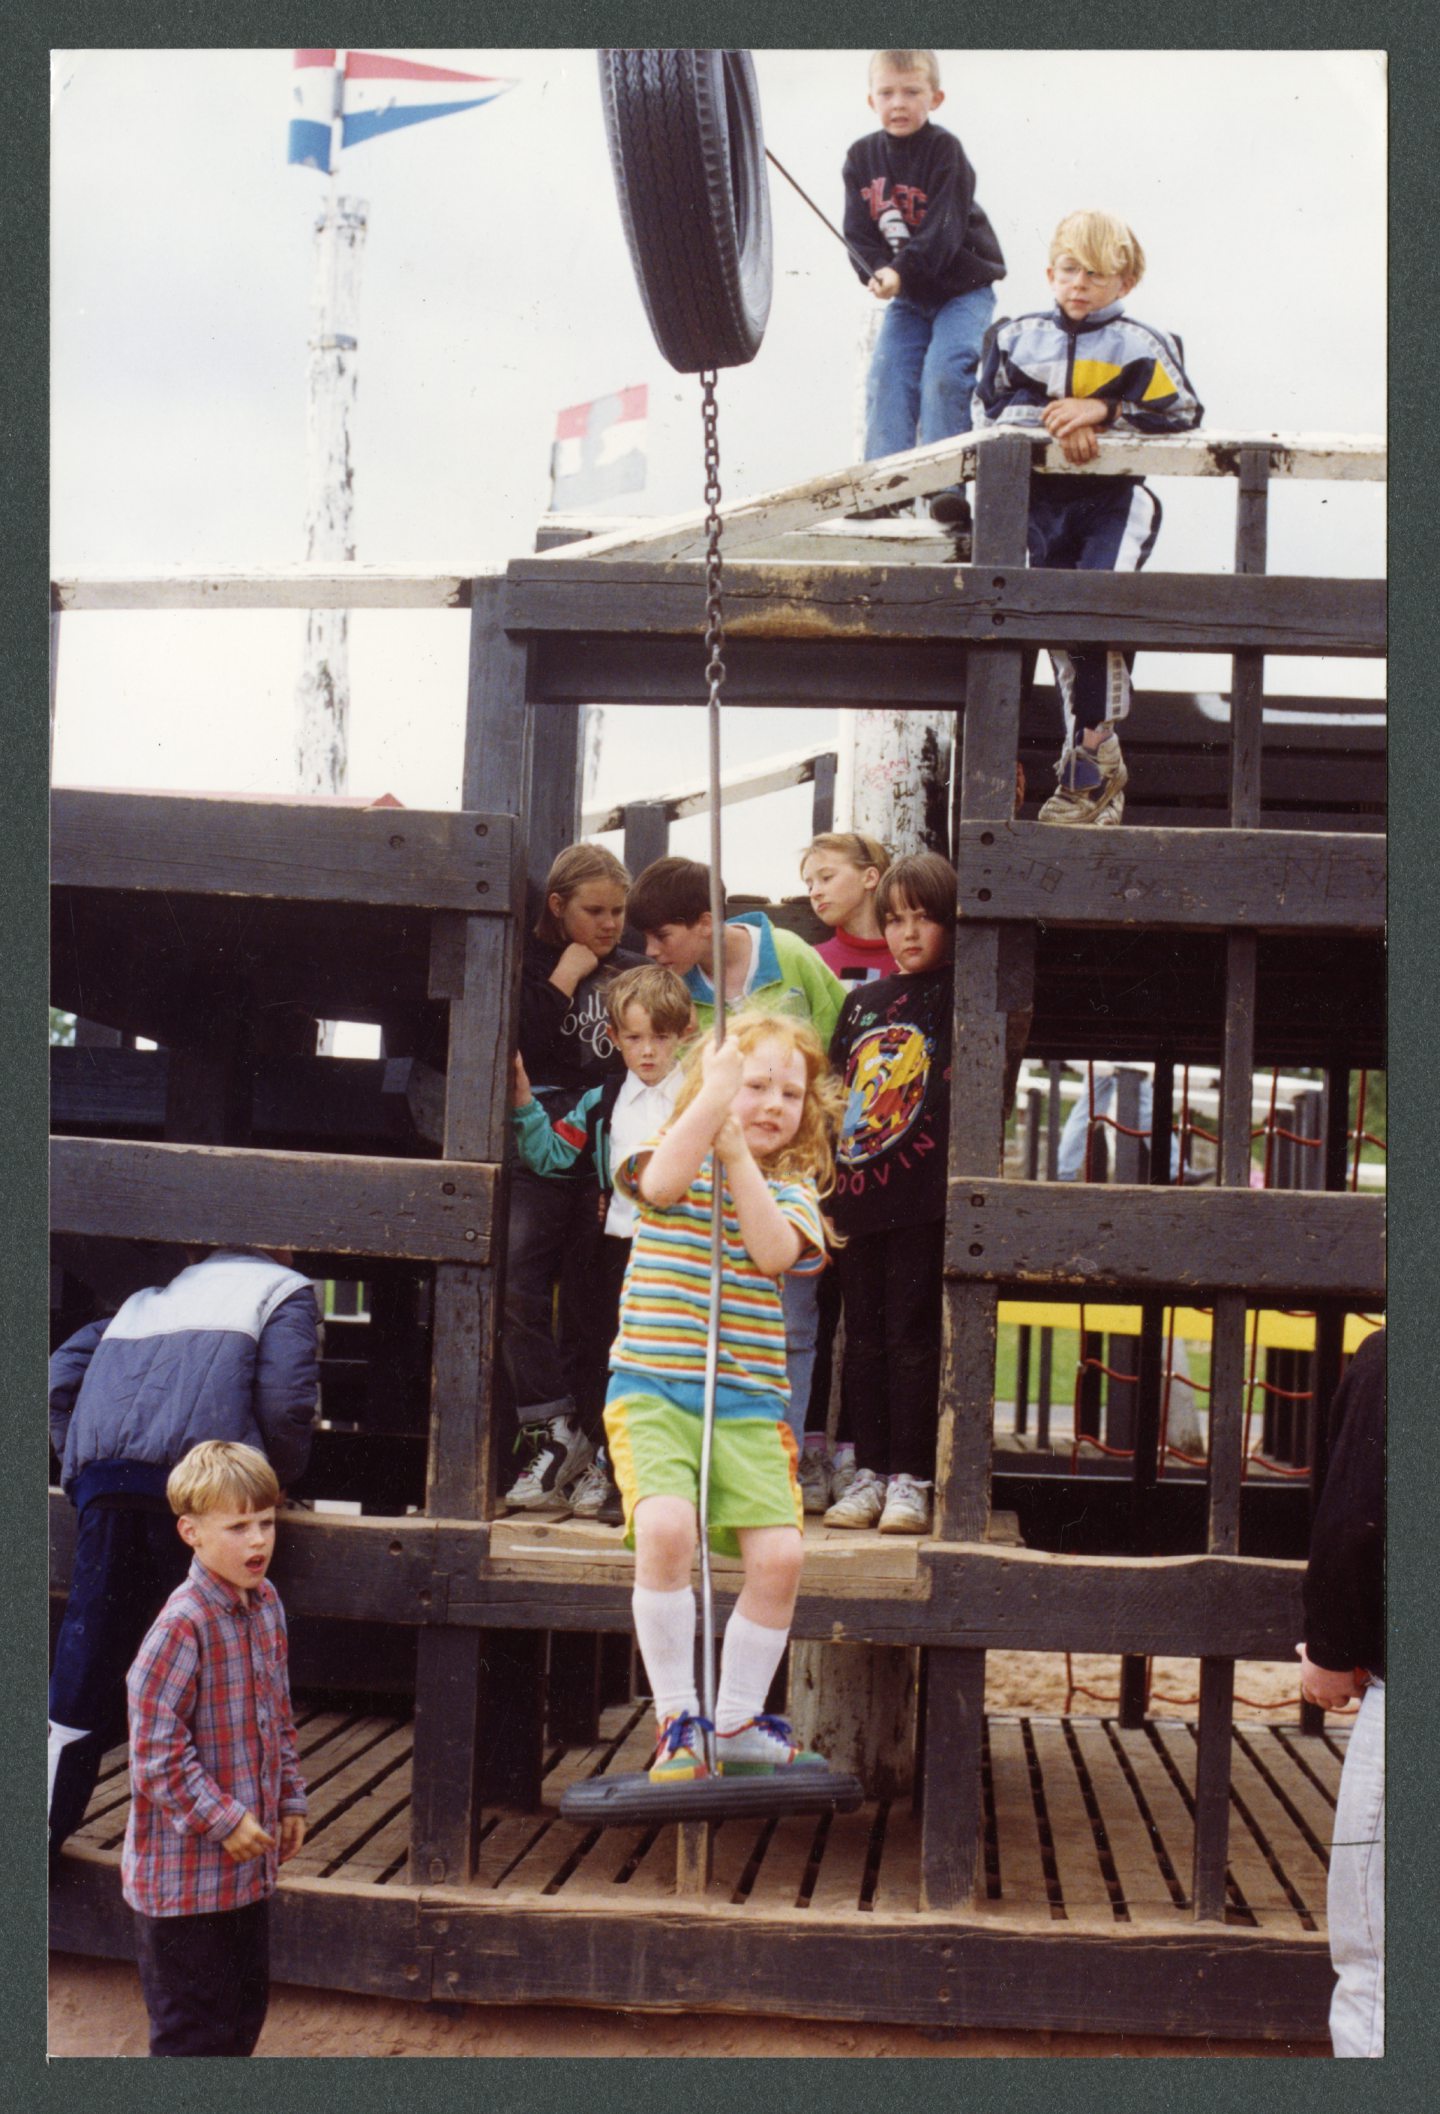 Were you one of those children who spent their summer at the adventure playground? Image: DC Thomson.